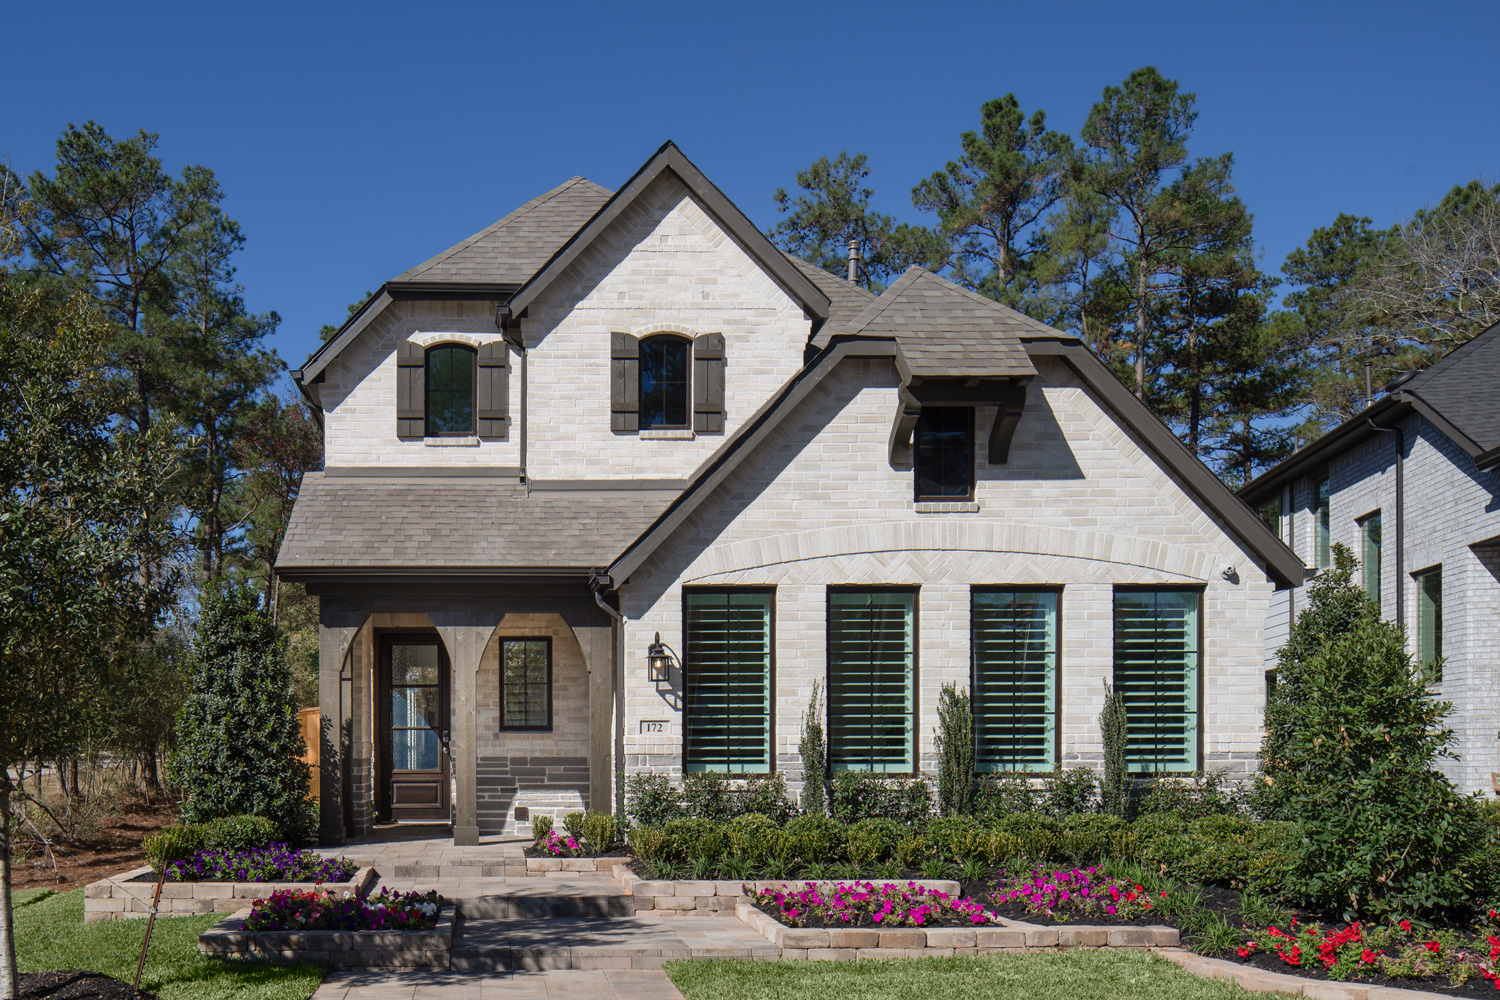 Up To $10,000 Spring Buyer’s Incentive For New Homes Purchased In The Woodlands Hills March 1 – April 30